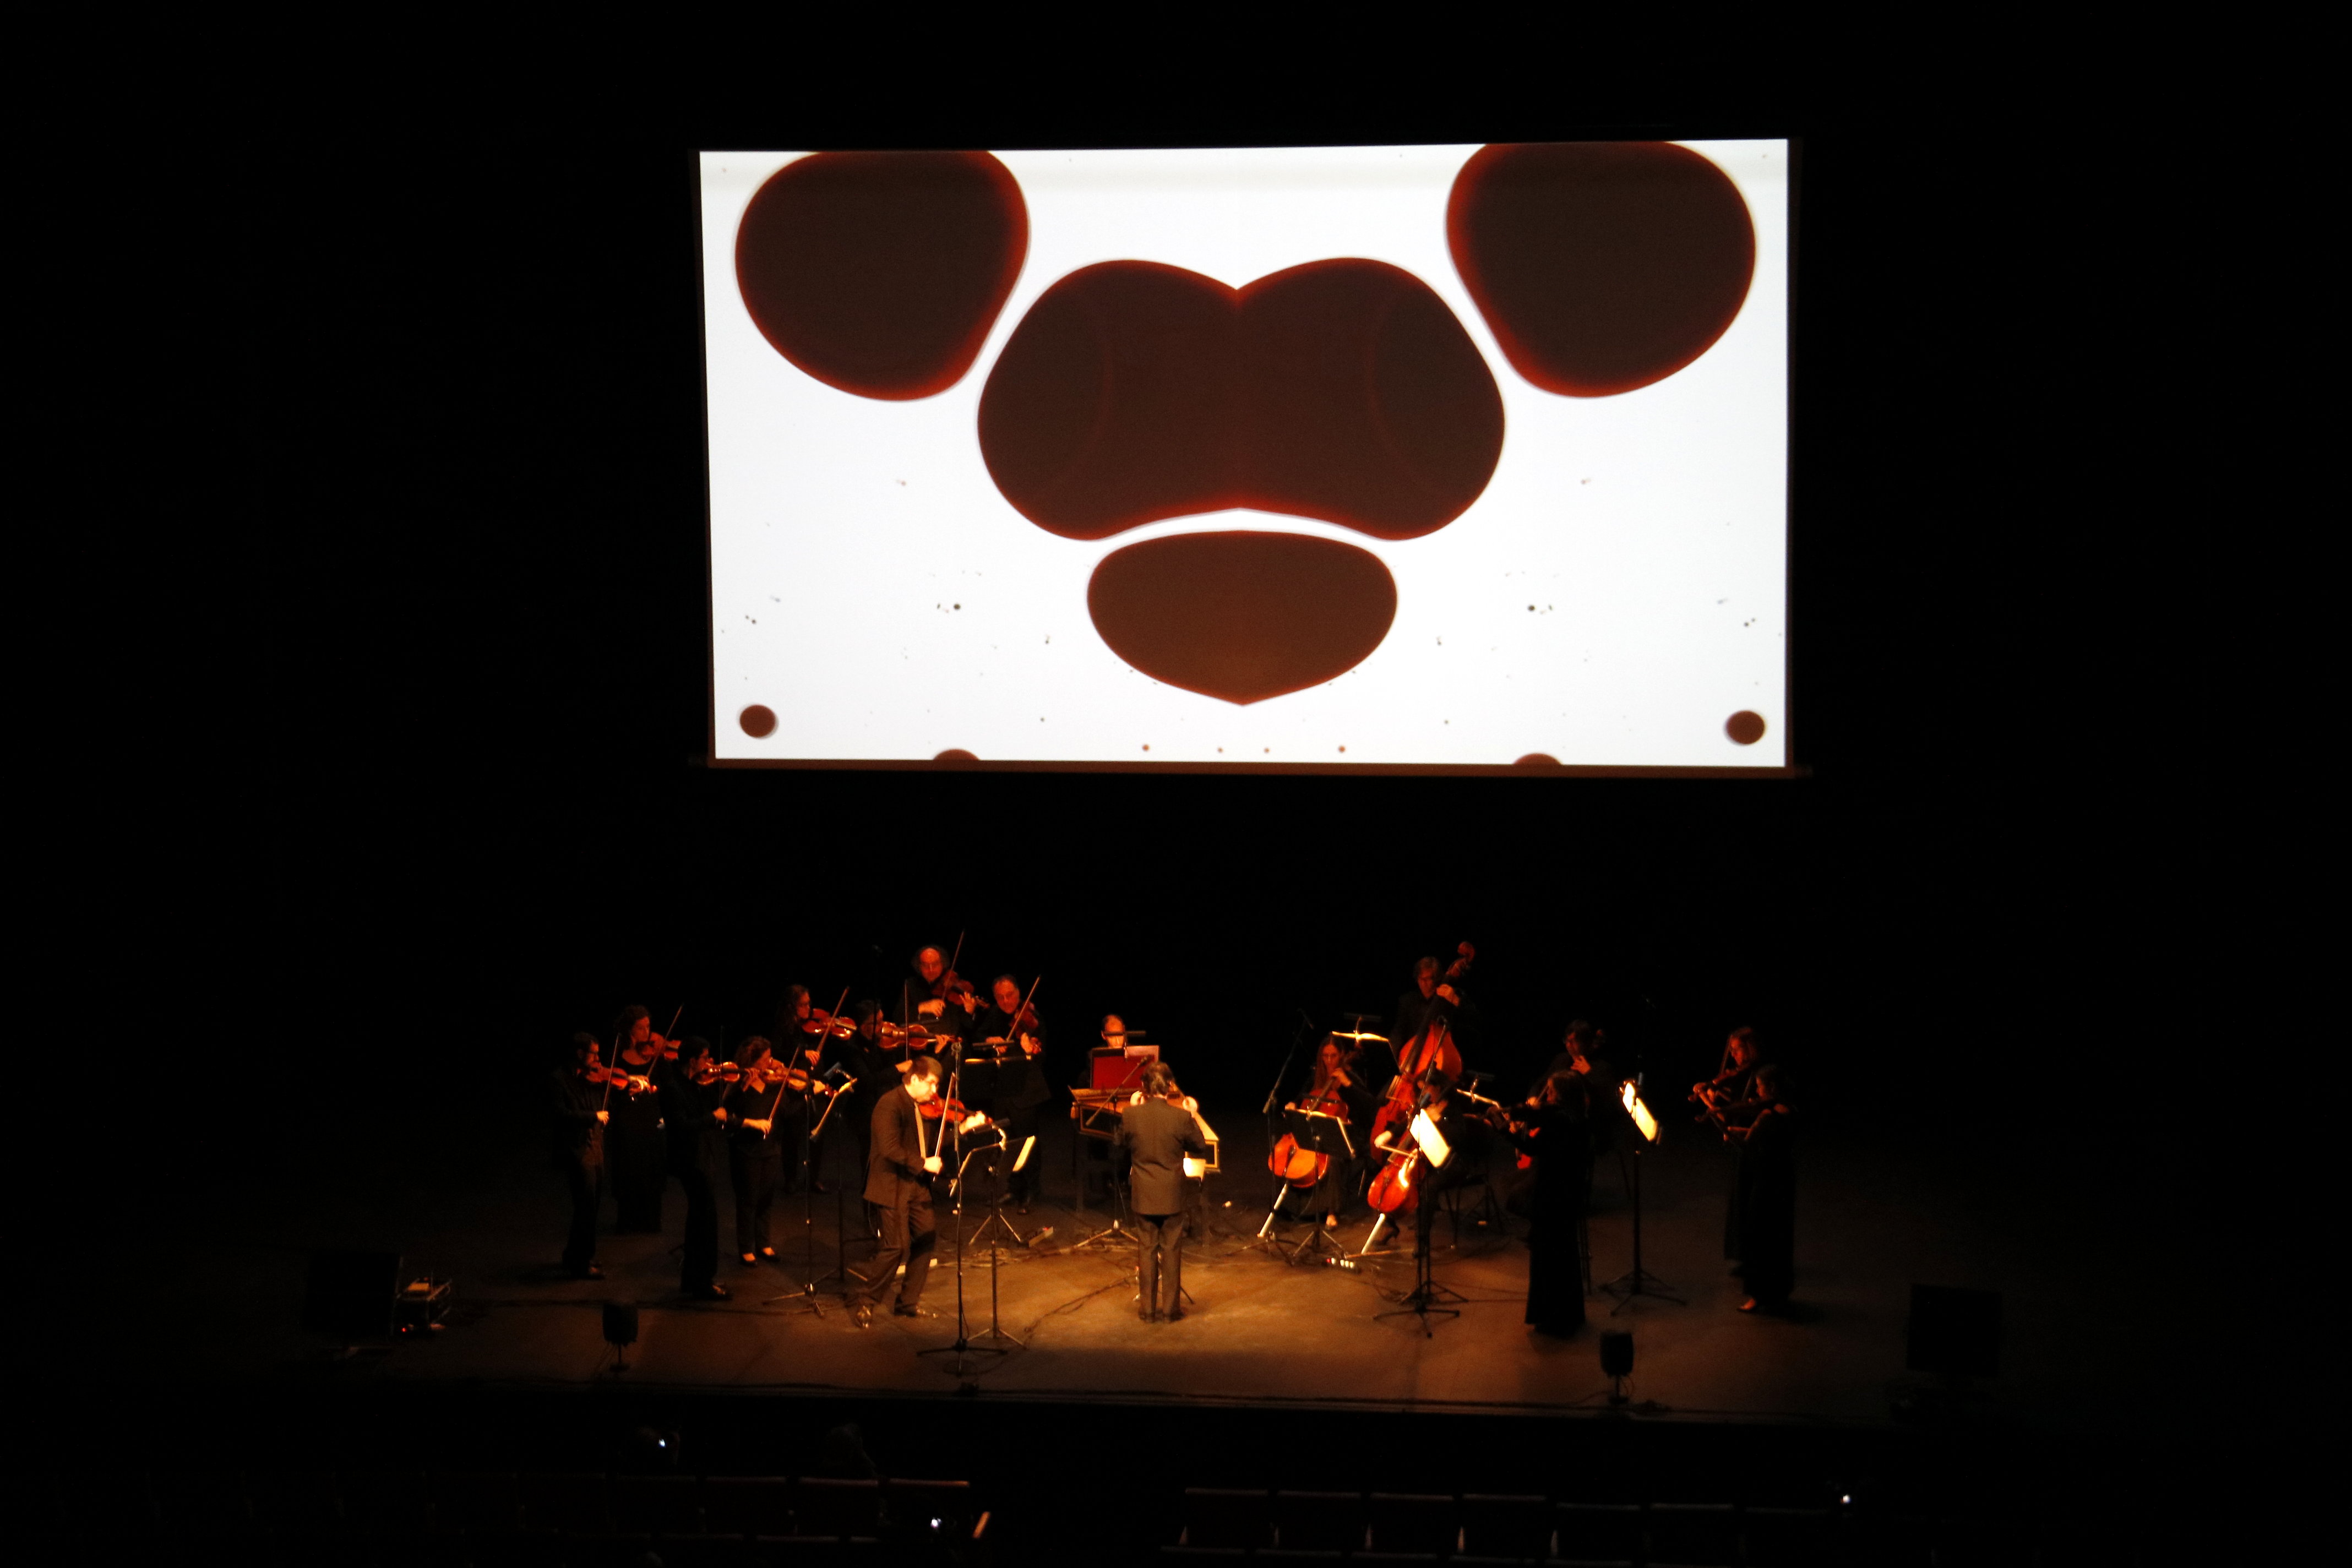 The projection of the concert-projection of ‘Animation for Vivaldi’s Four Seasons,’ performed by the Symphonic Julià Carbonell Orchestra (OJC) at the Animac inauguration on February 22 2018 (by Laura Cortés)